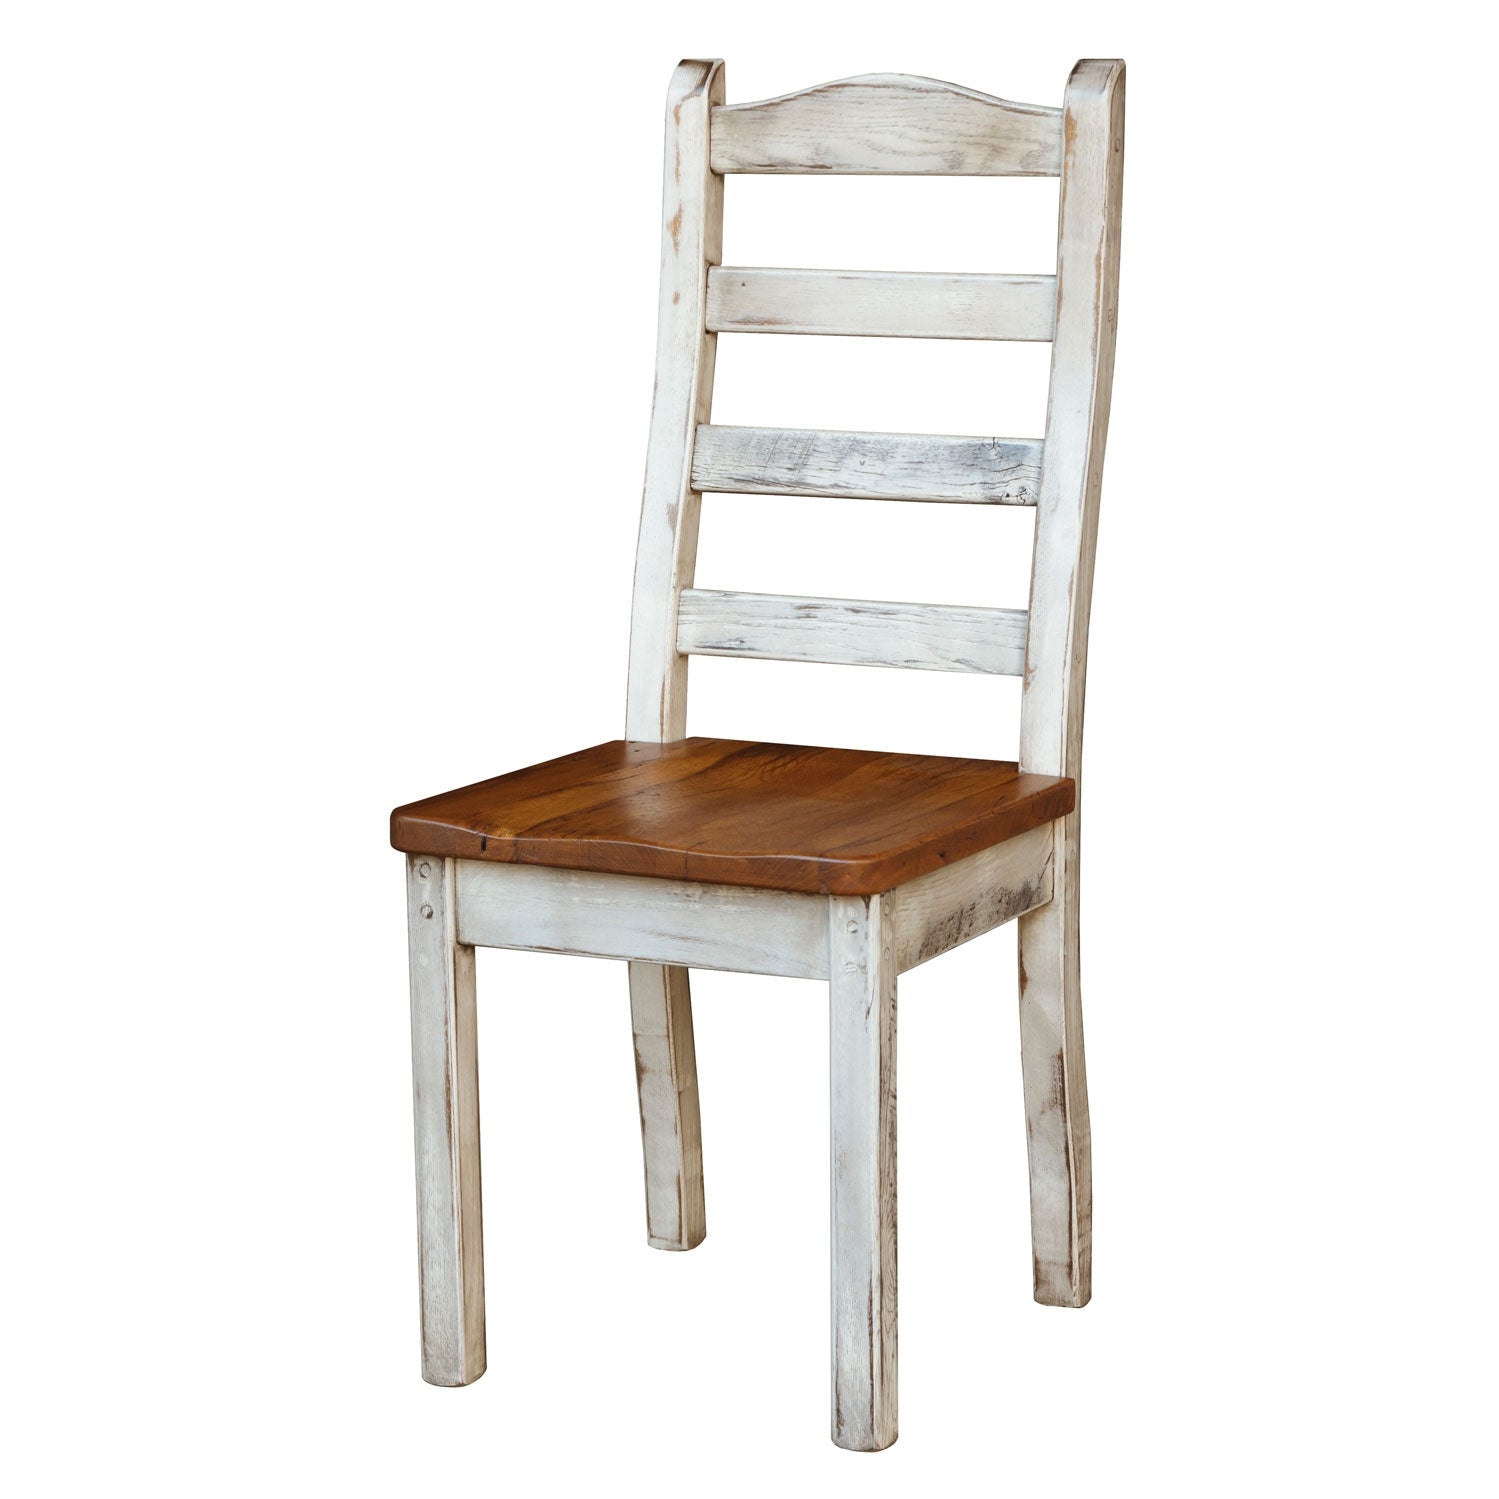 Curved Barnwood Chair - snyders.furniture